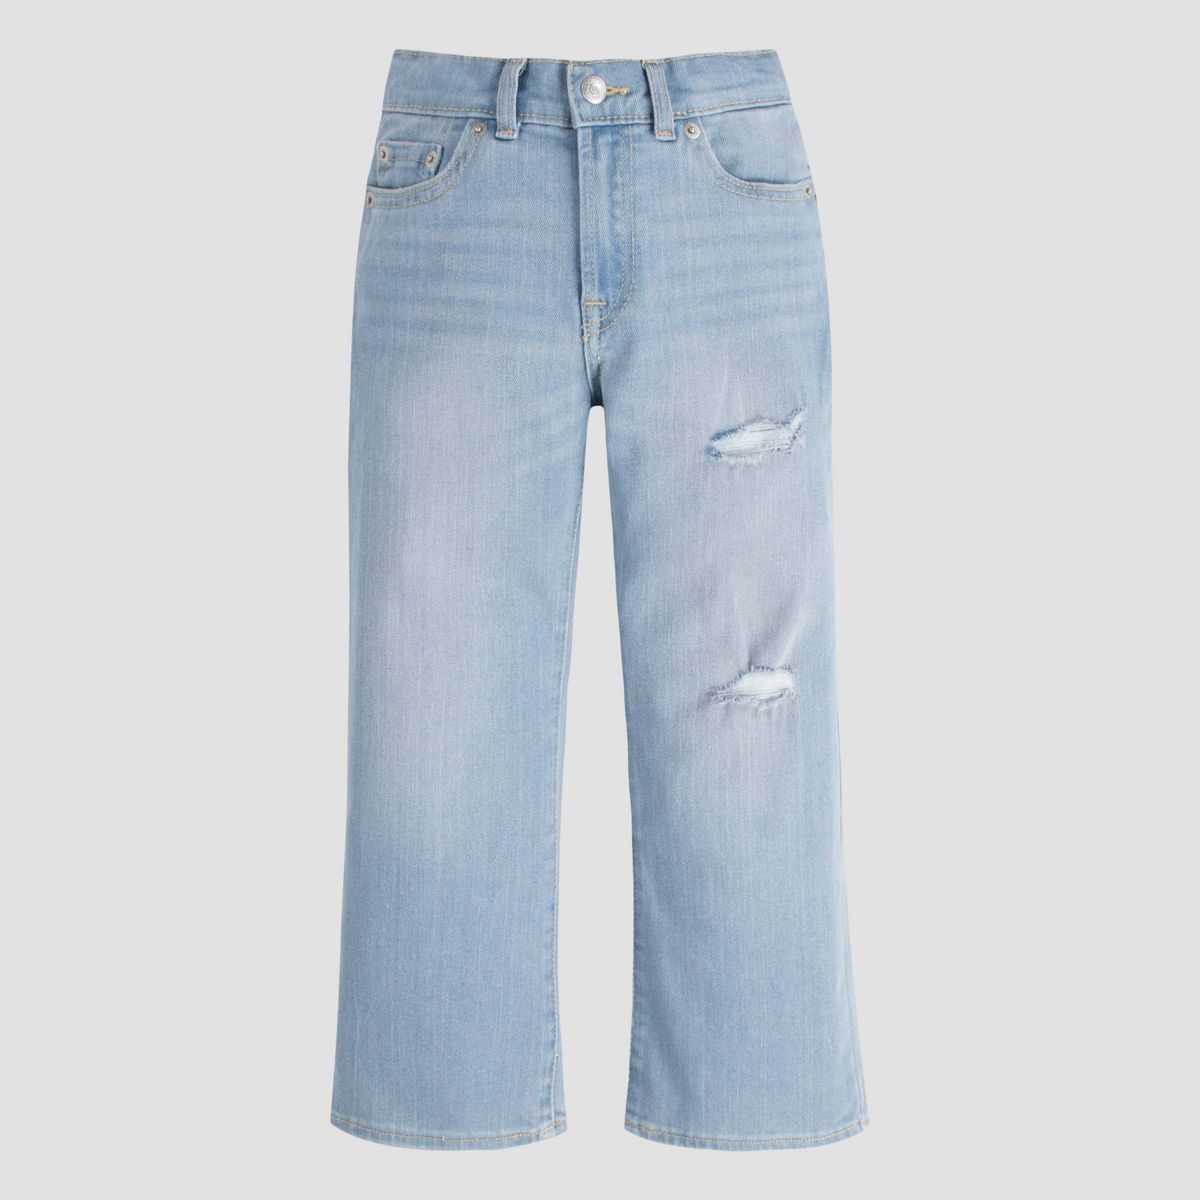 Levi's® Girls' Baggy Jeans | Target